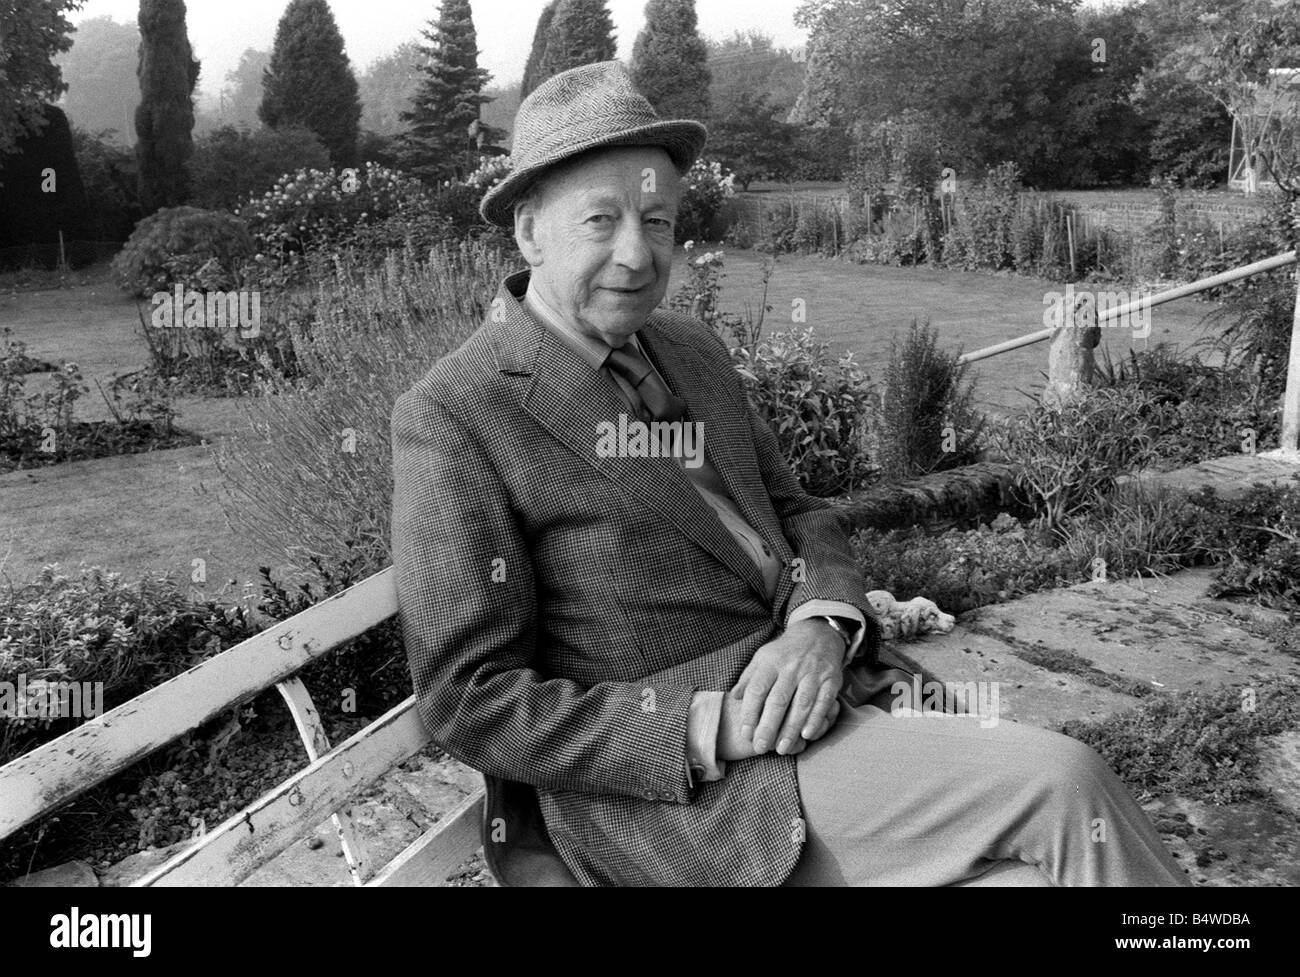 Winston Graham author novelist and screen writer October 1985 seated on a bench in his garden Winston Graham was born in Manchester on June 30 1910 He has been writing novels since the age of 17 Ross Poldark was first published in 1945 followed by Demelza in 1946 Jeremy Poldark in 1950 and Warleggan in 1953 He now lives in Sussex in Abbotswood House Before moving to Sussex Winston Graham spent thirty years at Perranporth in Cornwall There at Flat Rocks he wrote the first four Poldark books which the Illustrated London News pronounced not only rattling good yarns but full of incredibly Stock Photo